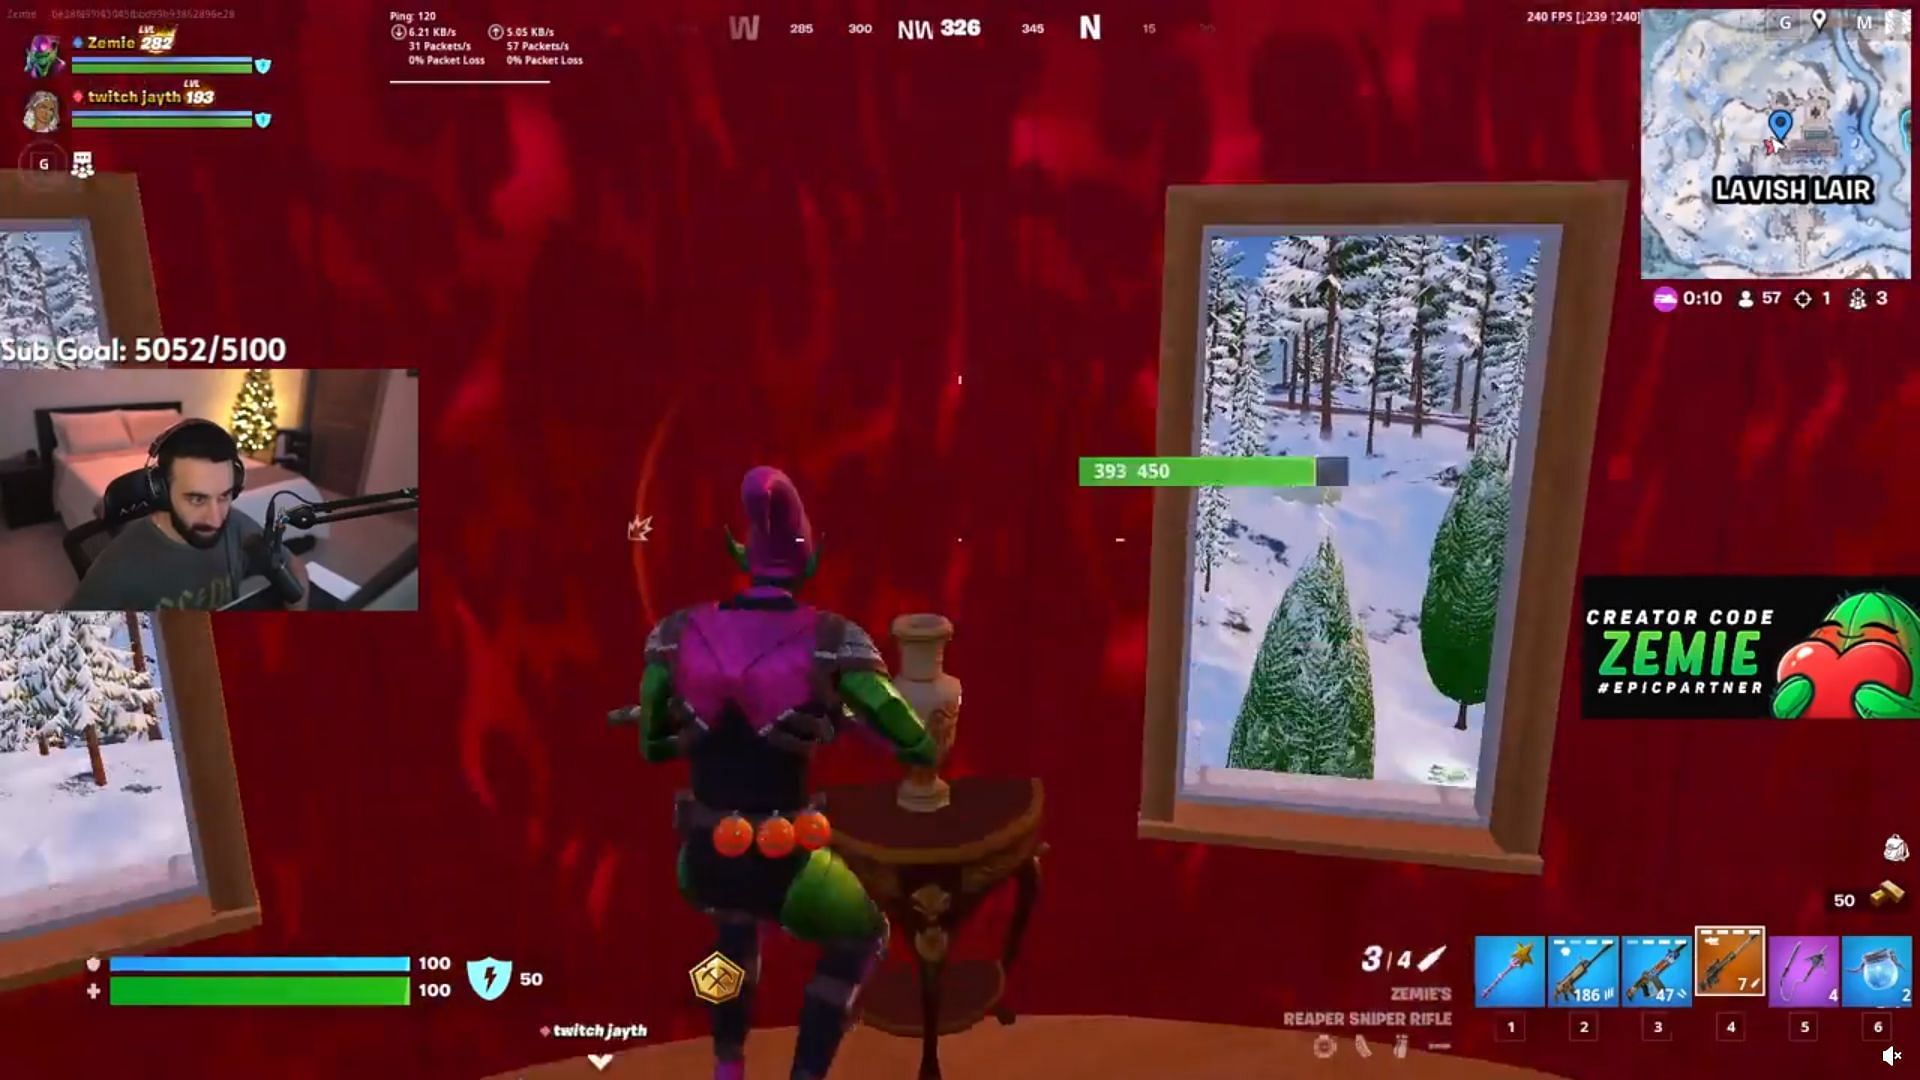 Fortnite player snipes opponent hiding in bush, community unsure if aimbot or skill